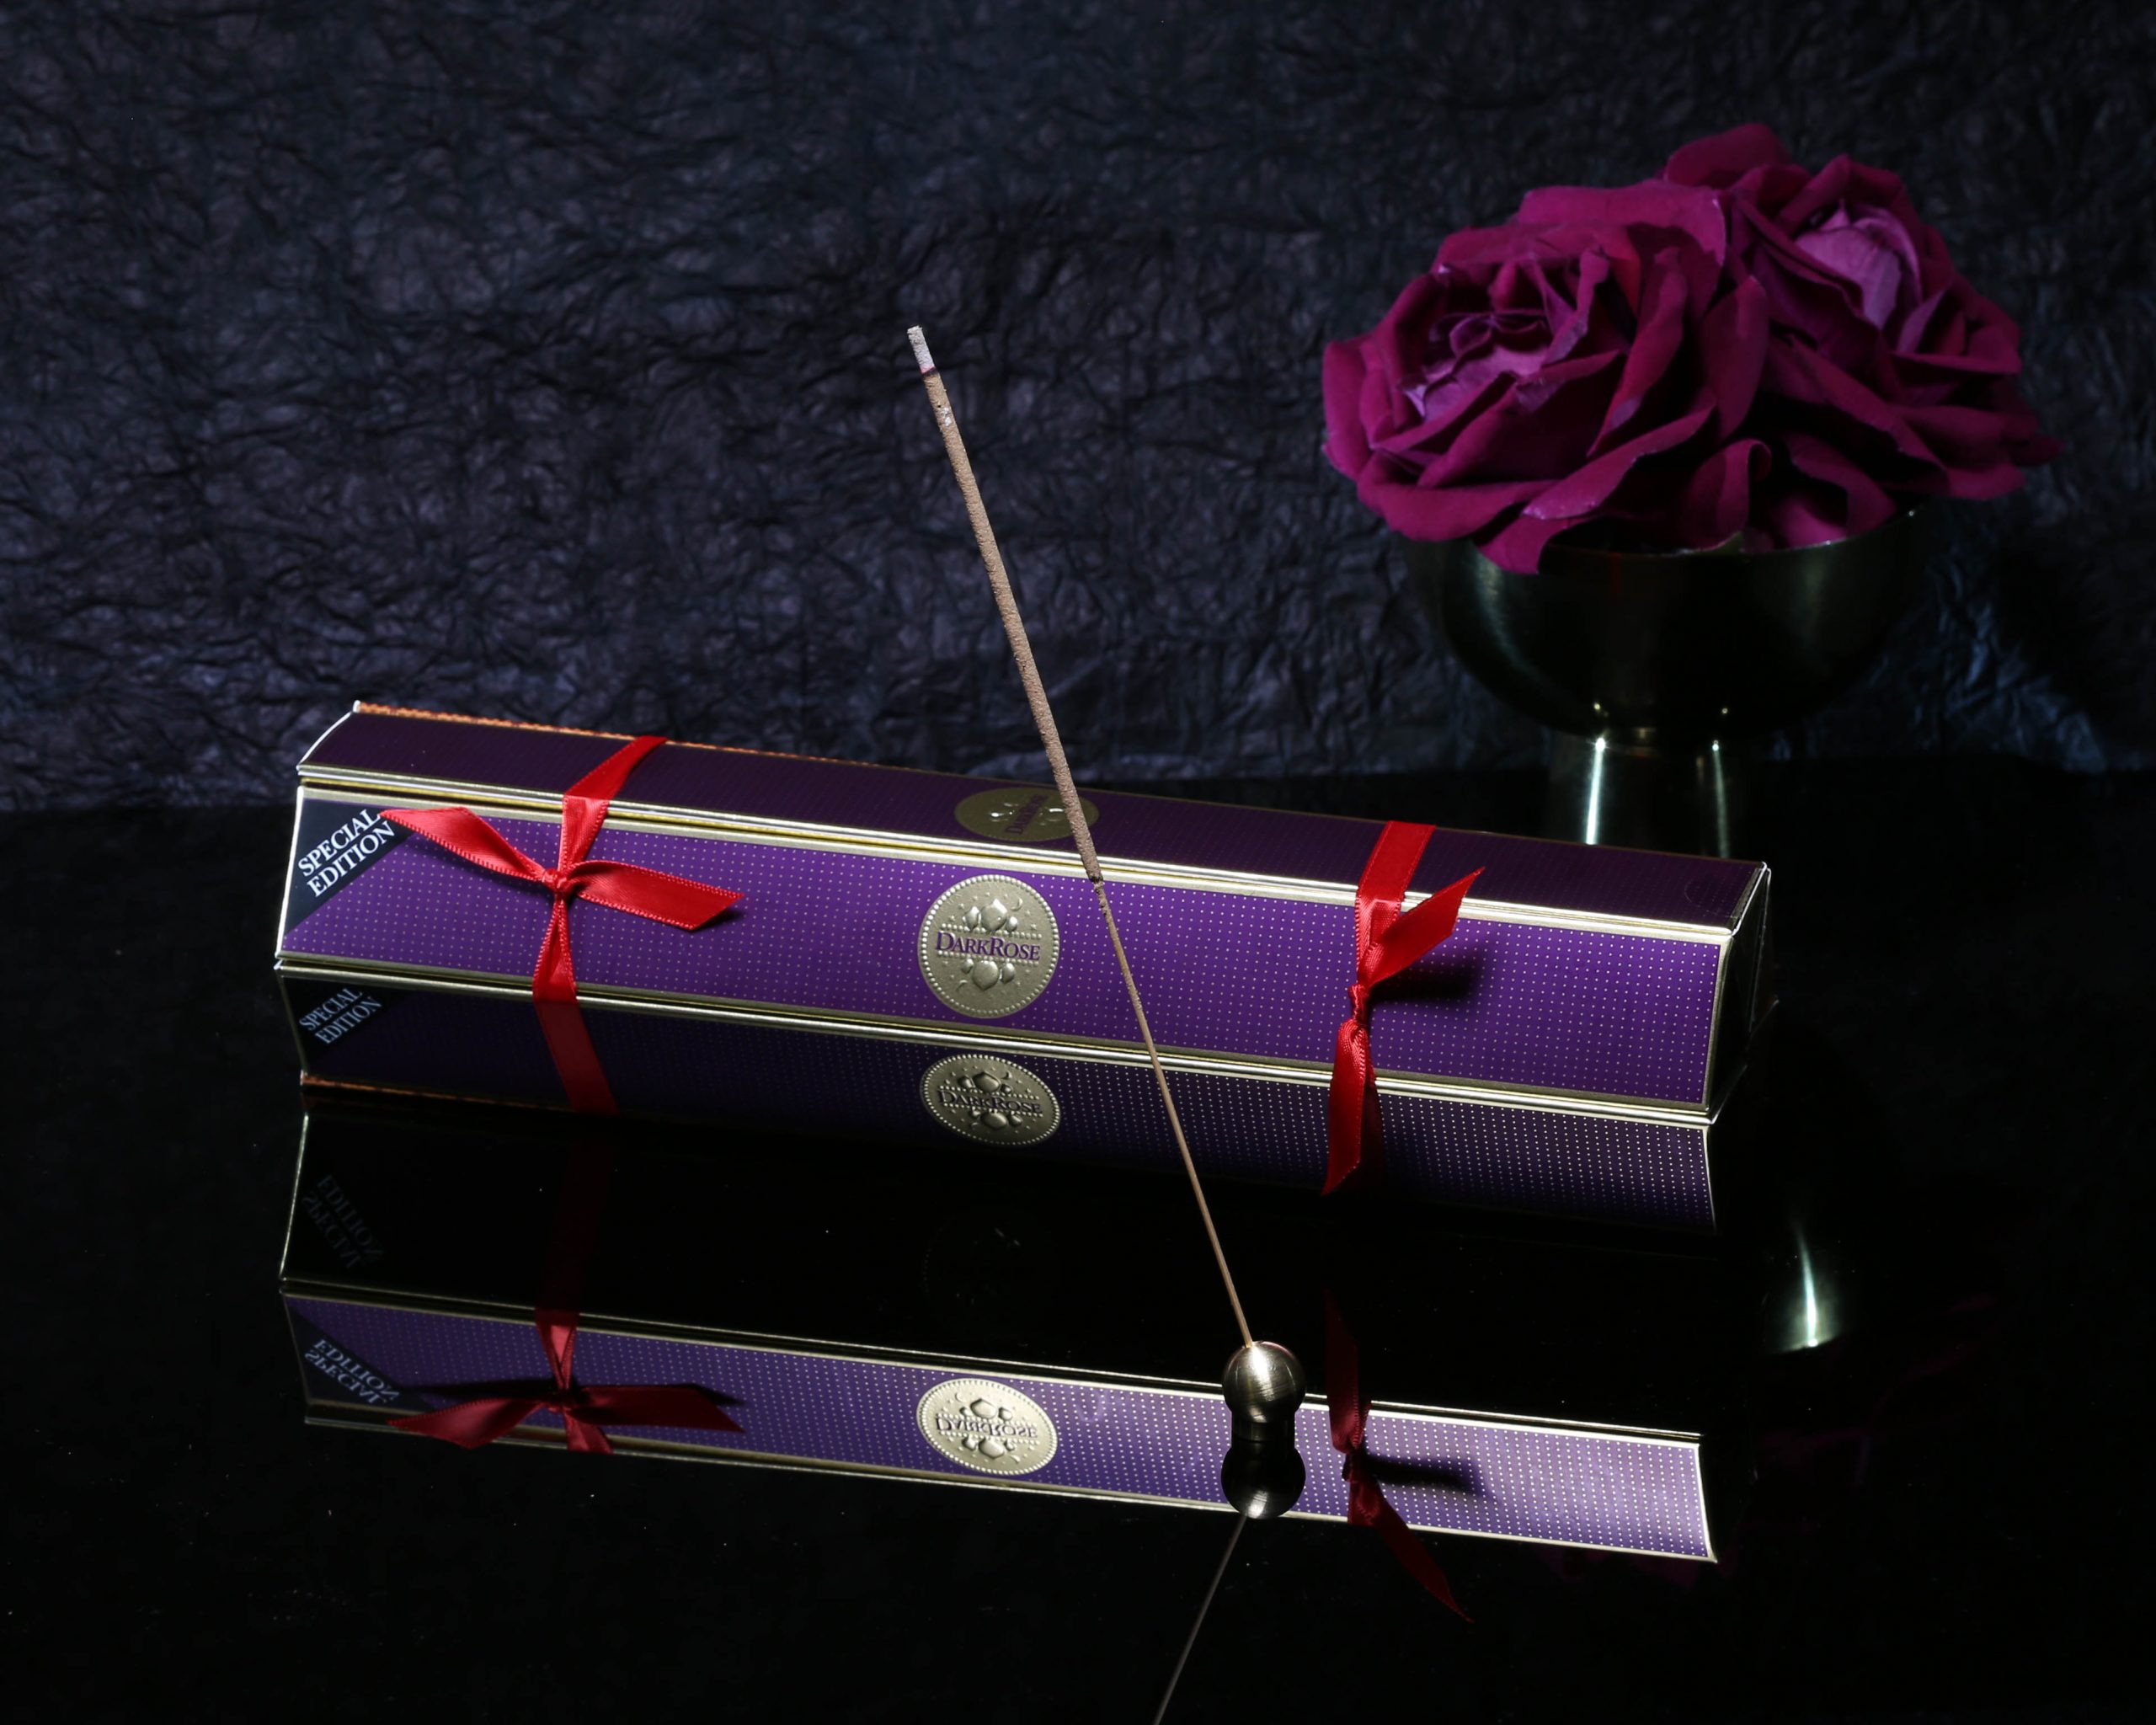 Czech & Speake Dark Rose Incense Sticks bundle pack on shiny black surface and dark background with rich pink roses behind and incense stick in holder in front.